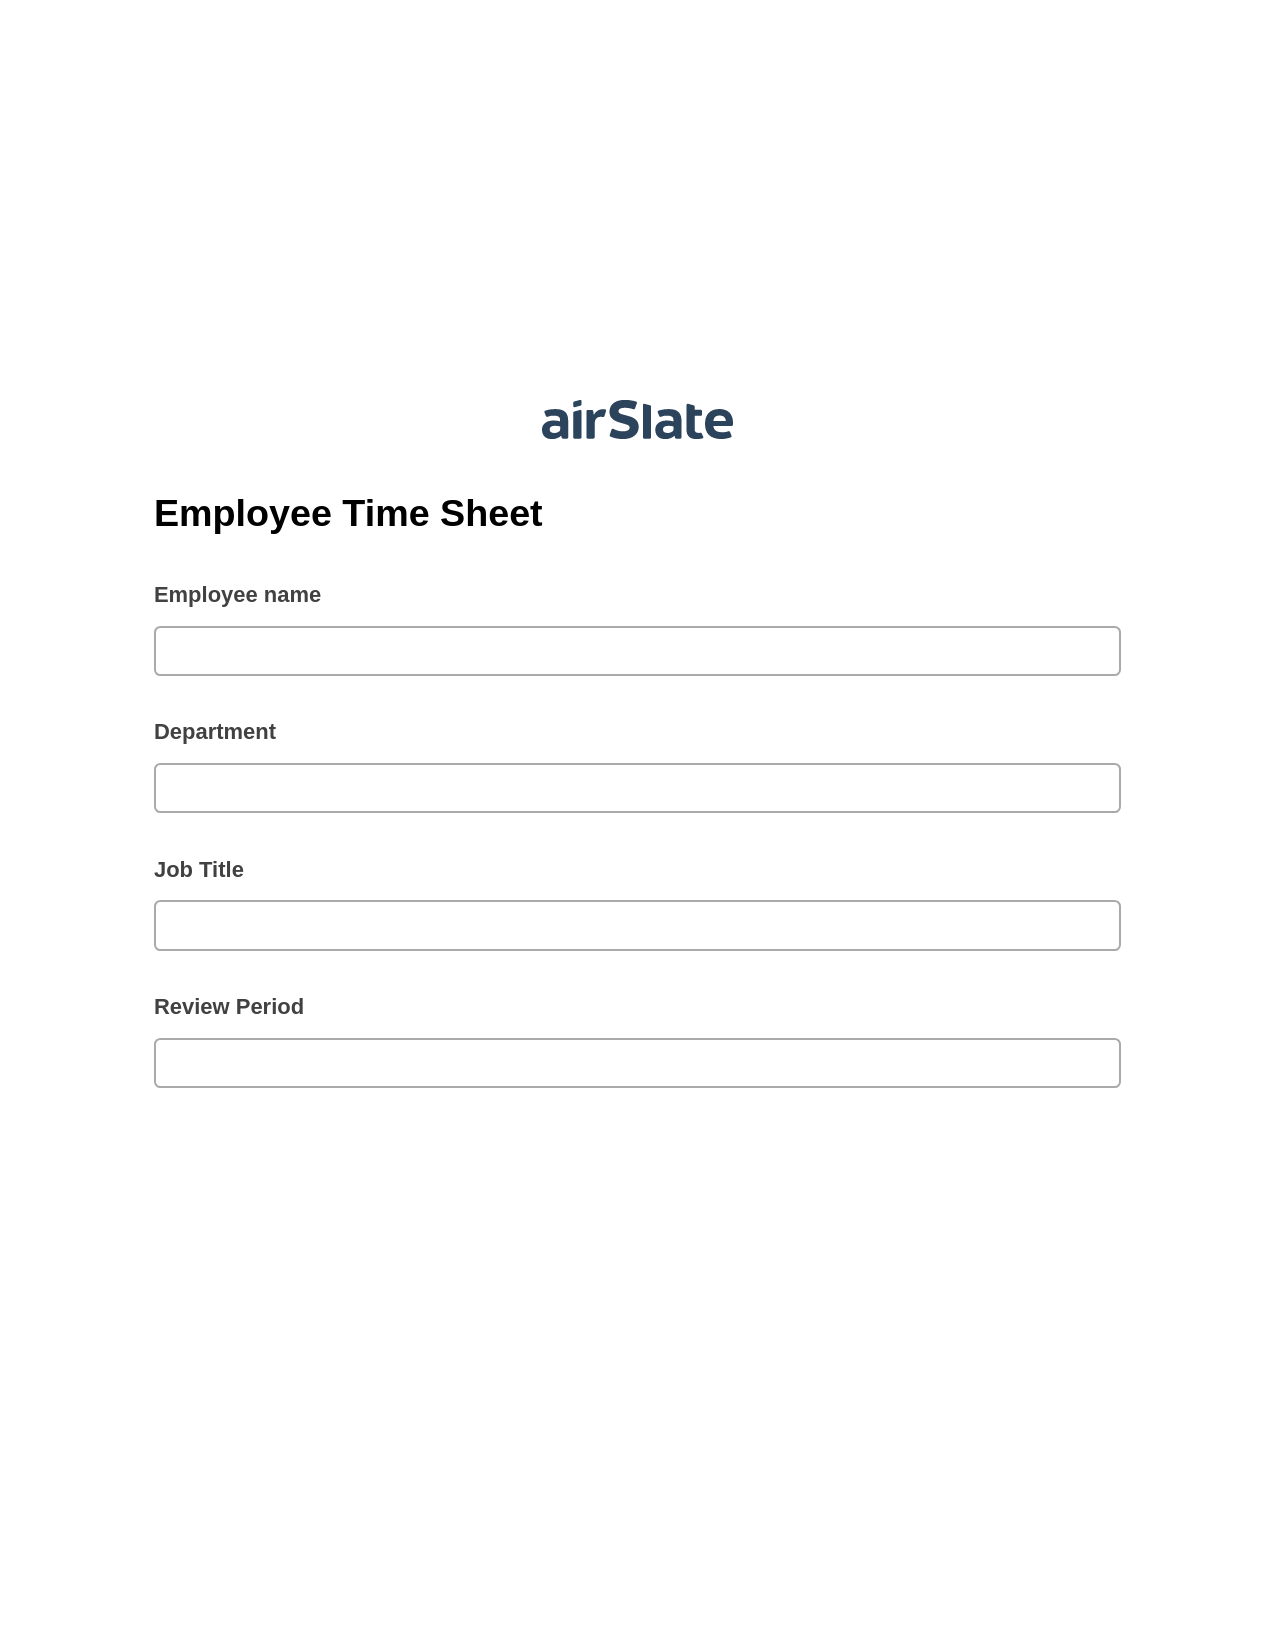 Multirole Employee Time Sheet Pre-fill from CSV File Bot, Email Notification Bot, Export to Smartsheet